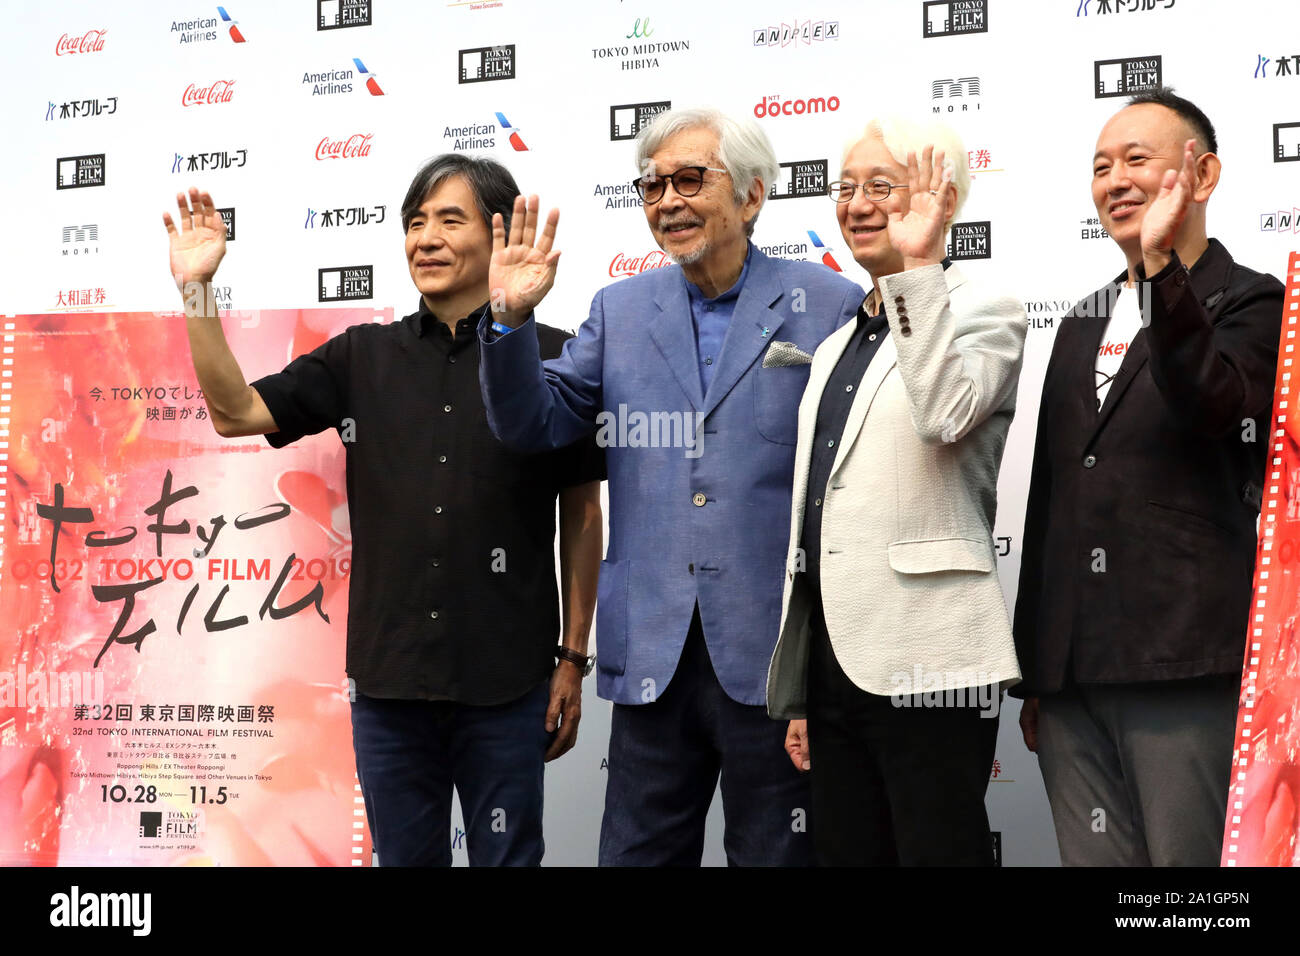 Tokyo, Japan. 26th Sep, 2019. (L-R) Japanese screenplay writer Kazuki Nakashima, film directors Yoji Yamada, Macoto Tezka and Shin Adachi pose for photos as they attend the line-up announcement of the 32nd Tokyo International Film Festival in Tokyo on Thursday, September 26, 2019. The annual movie festival will be held from October 28 through November 5 and the opening movie will be 'Tora-san, Wish You Where Here' directed by Yoji Yamada. Credit: Yoshio Tsunoda/AFLO/Alamy Live News Stock Photo